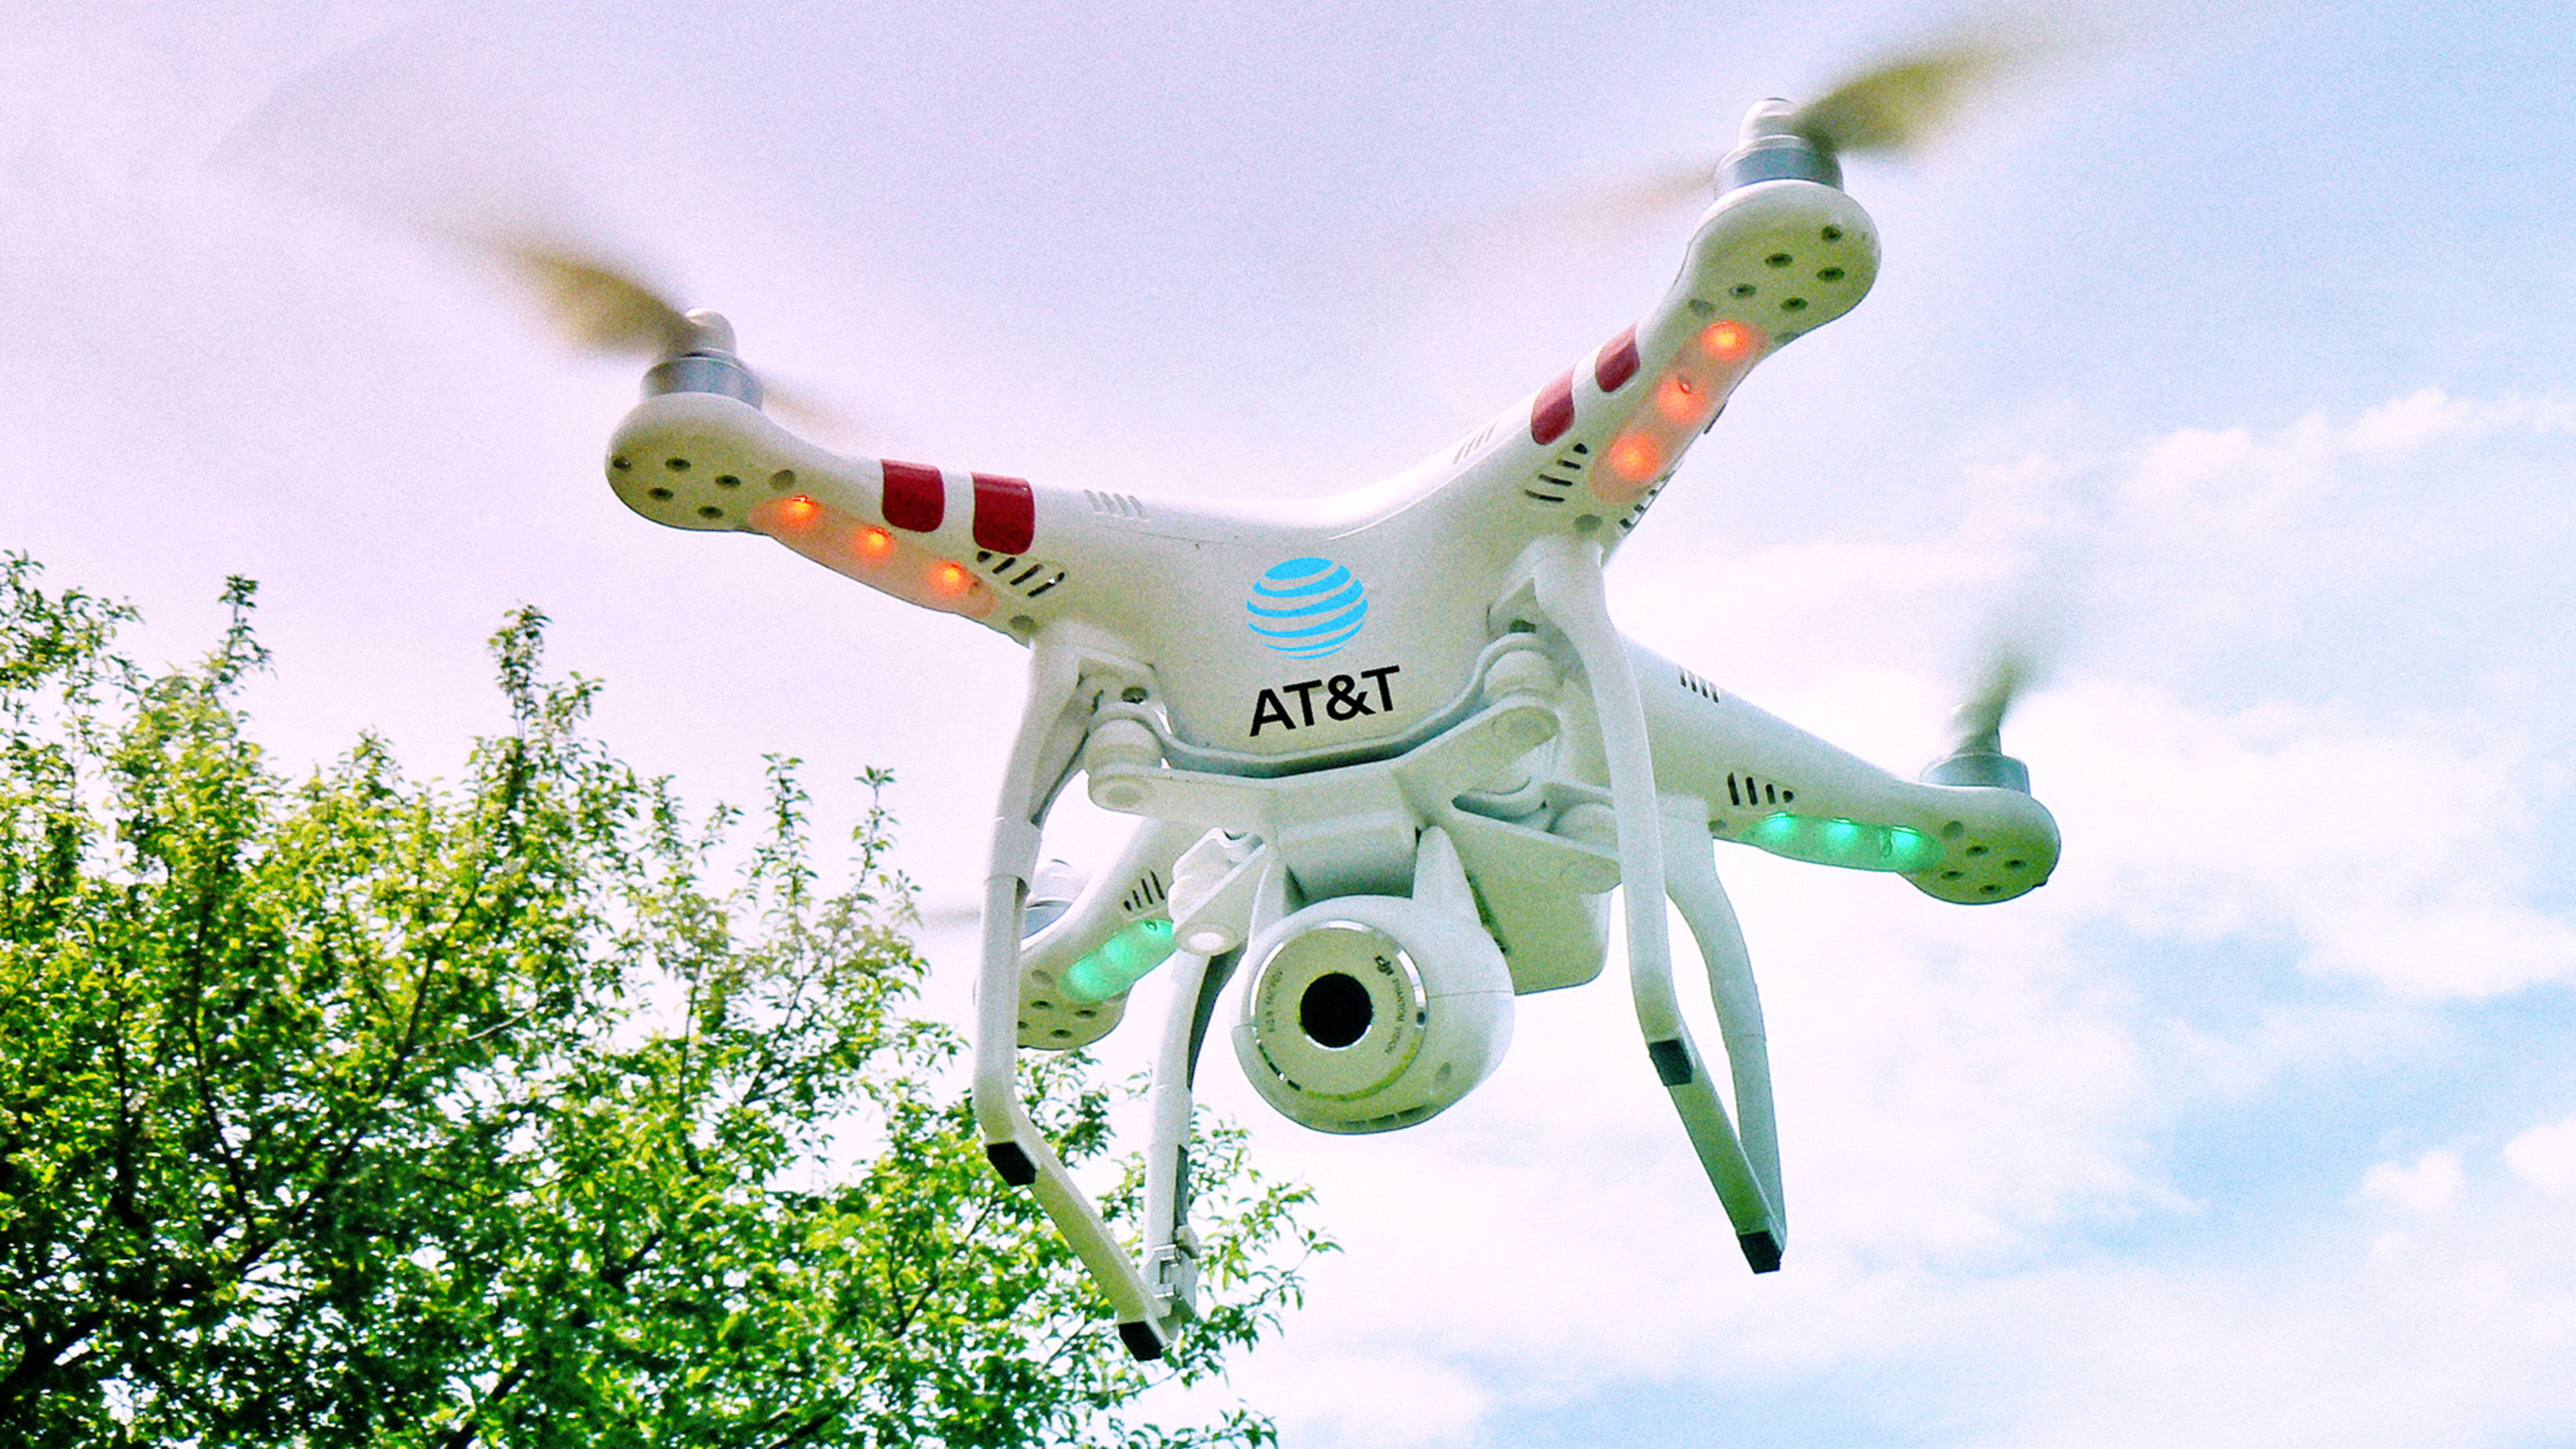 Coming Soon To AT&T’s LTE Network: Drones